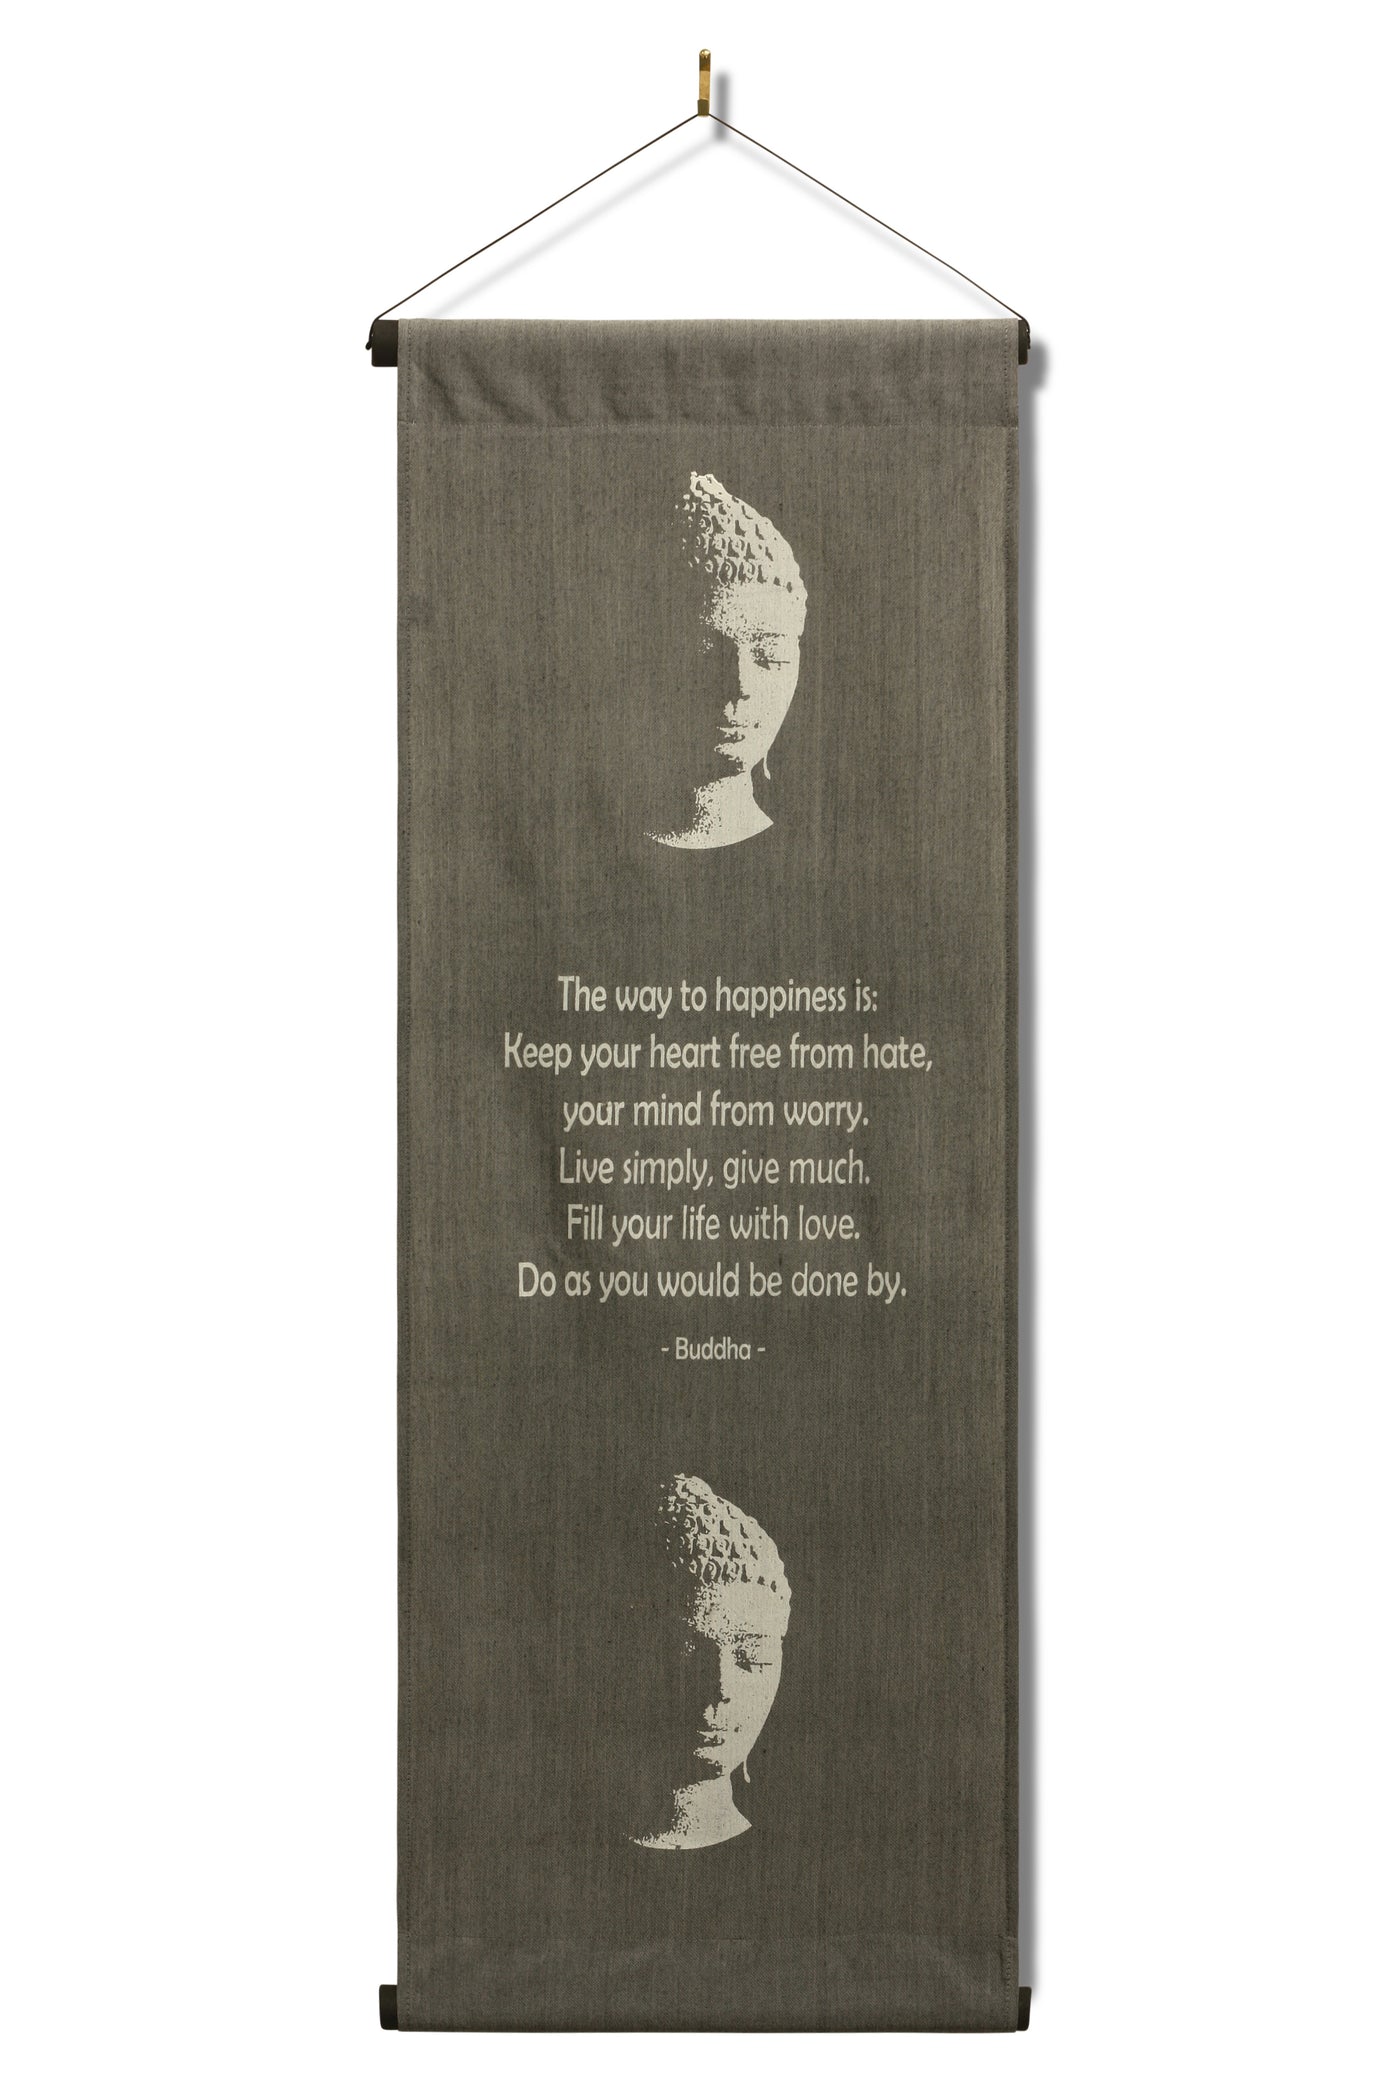 Inspirational Wall Hanging Scroll "Buddha - The Way To Happiness" Banner, Inspiring Quote, Affirmation Motivational Uplifting, Thought Saying Tapestry